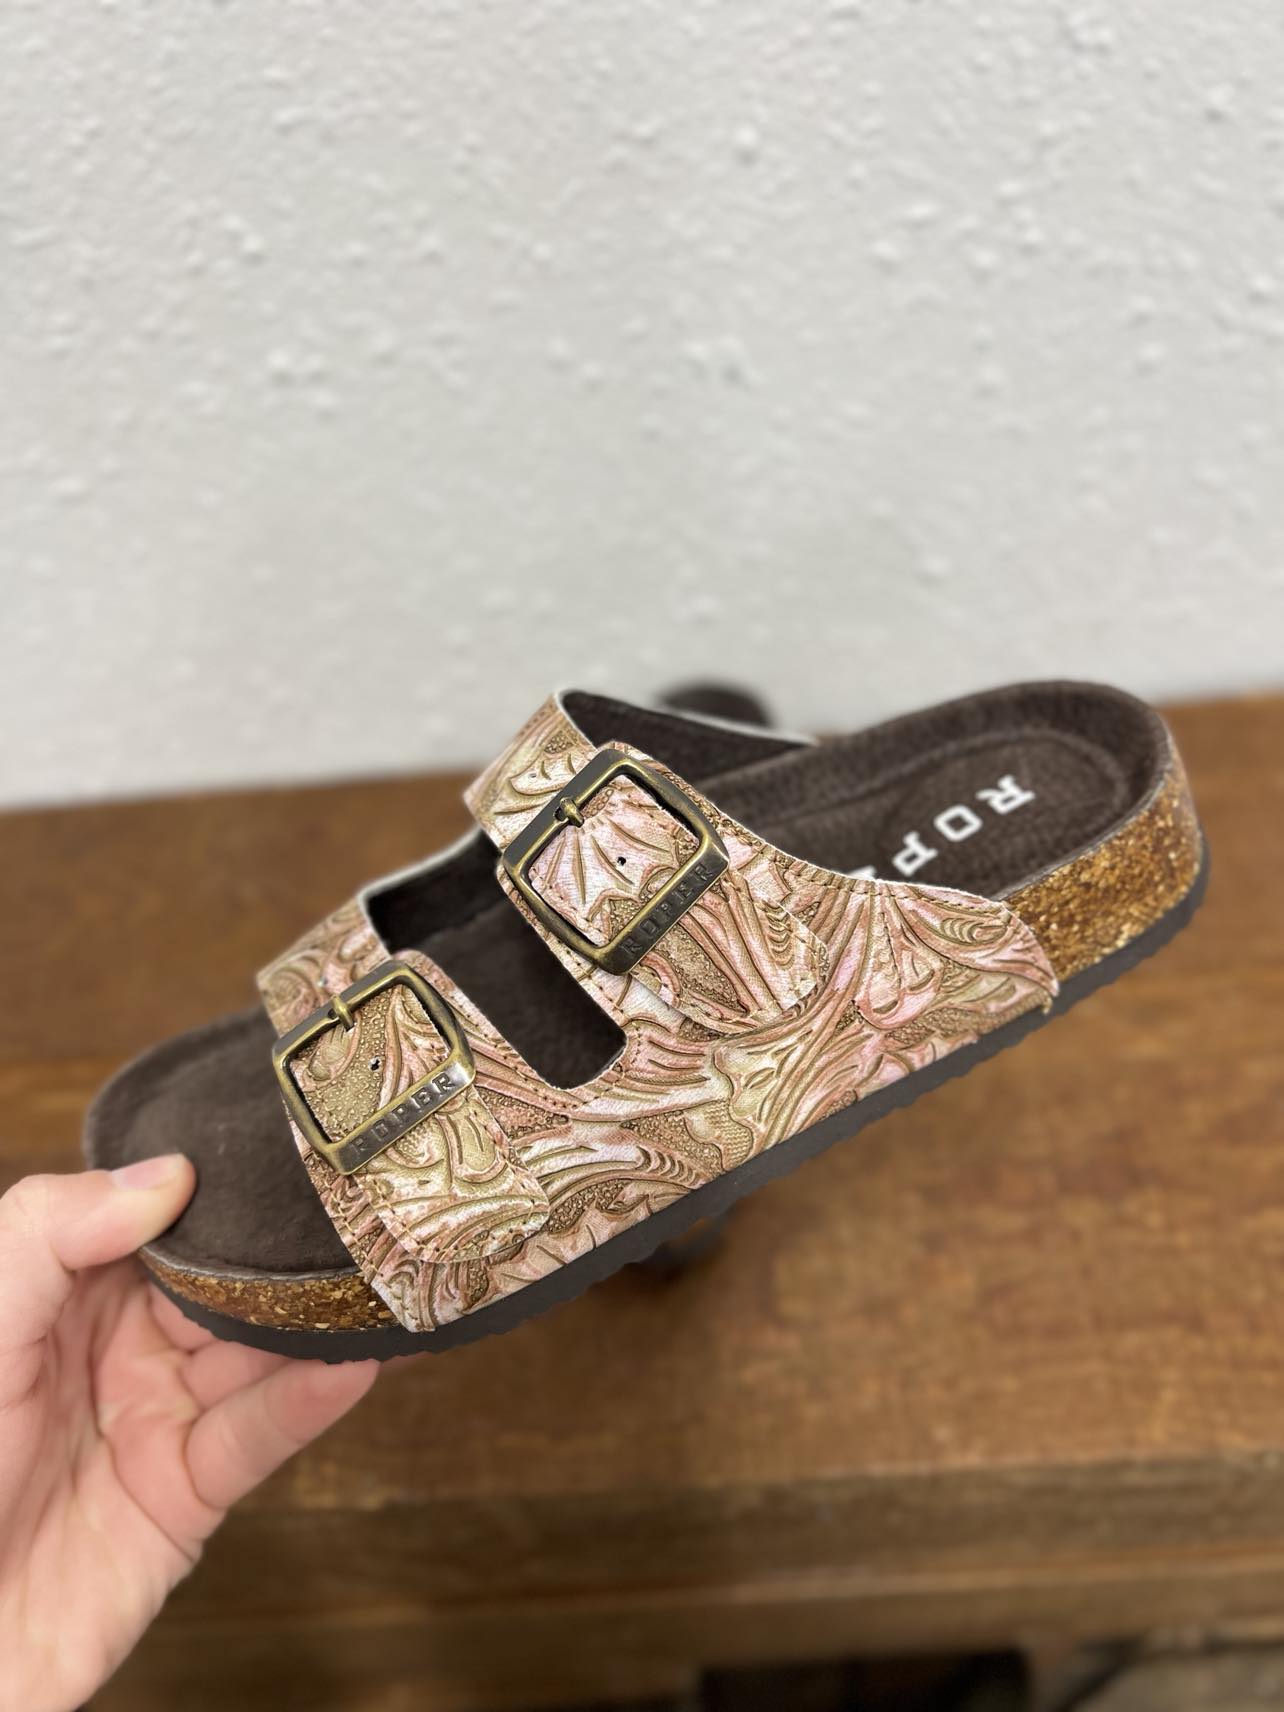 Roper Delilah Sandal in Tan-Sandals-Roper-Lucky J Boots & More, Women's, Men's, & Kids Western Store Located in Carthage, MO